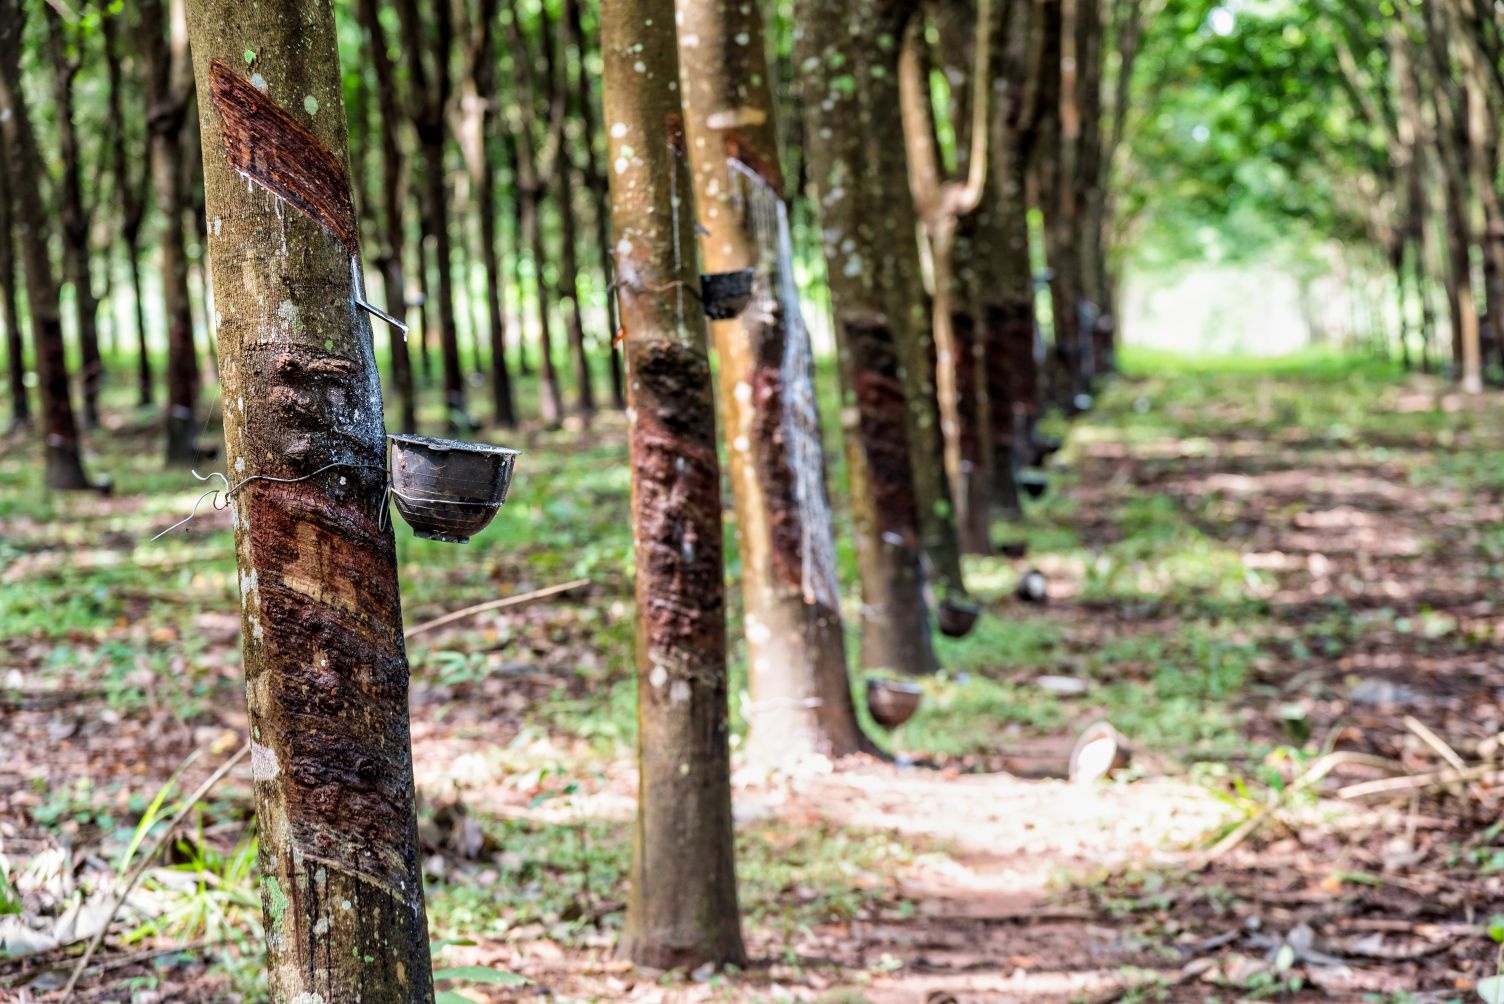 In the first six months of 2021, rubber exports reached $714,319 tonnes